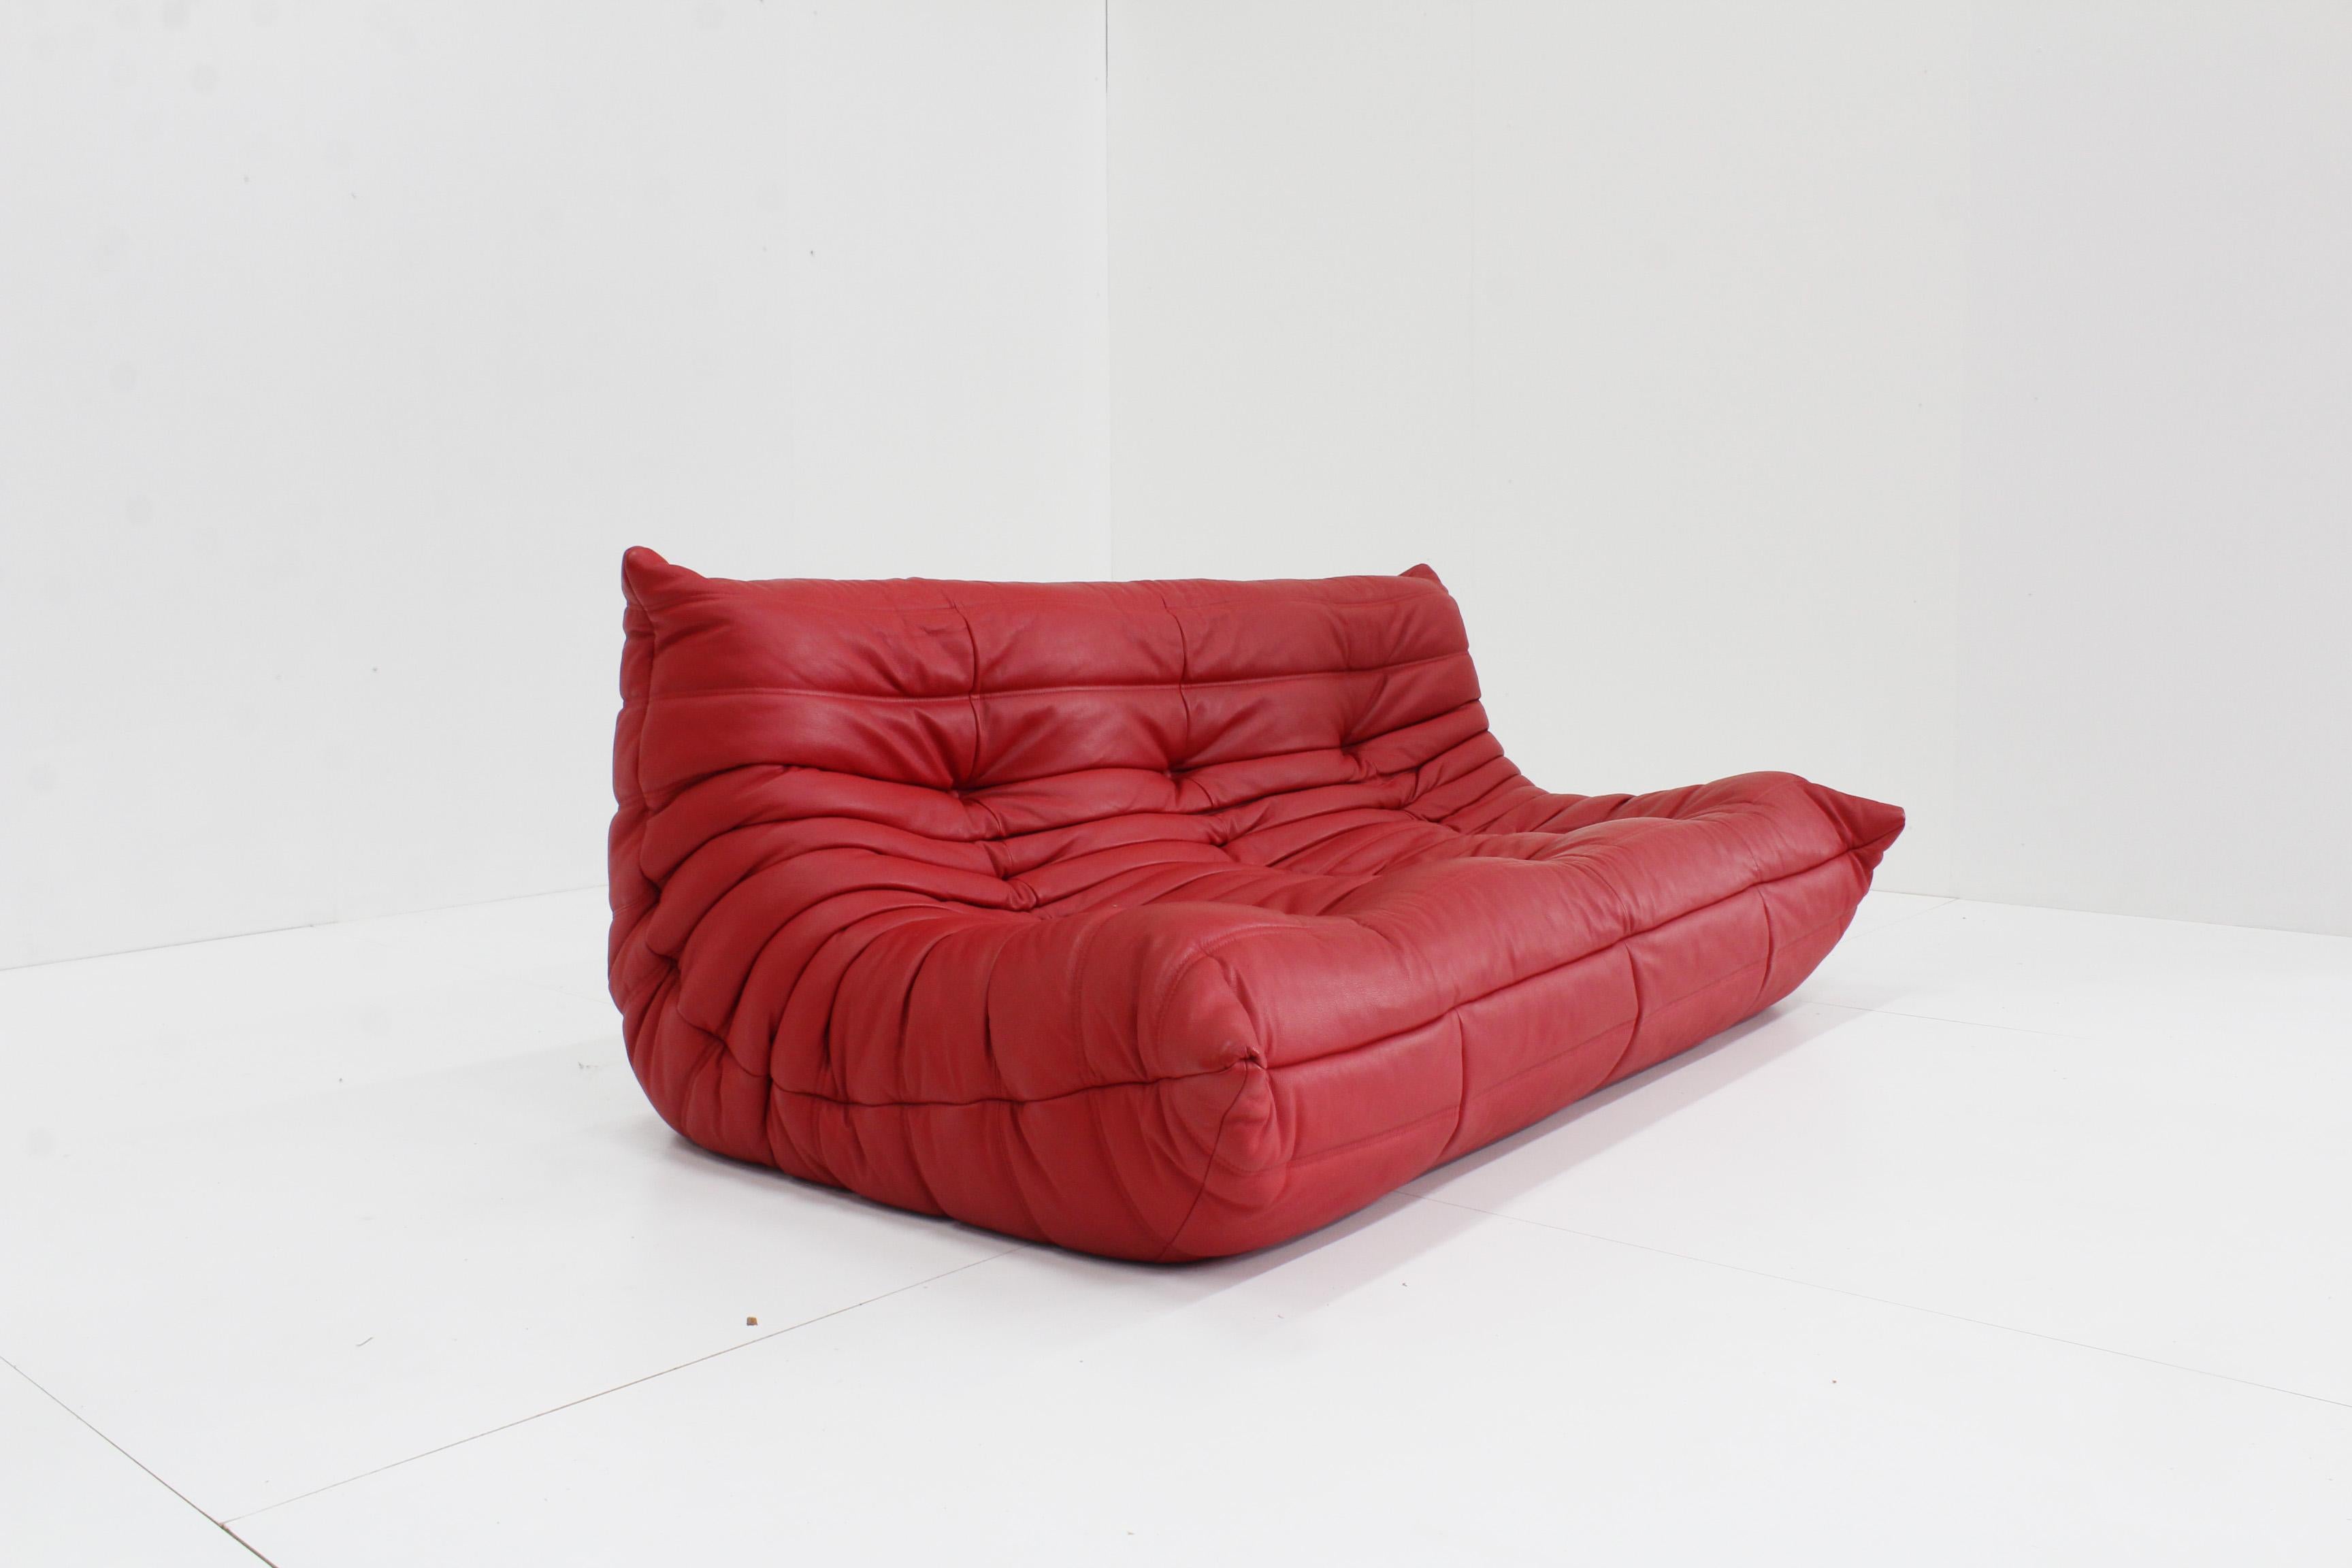 Original red leather Togo three seater by Michel Ducaroy for Ligne Roset

Original Red leather Togo sofa set from Ligne Roset by Michel Ducaroy. This is an original piece in high quality leather.